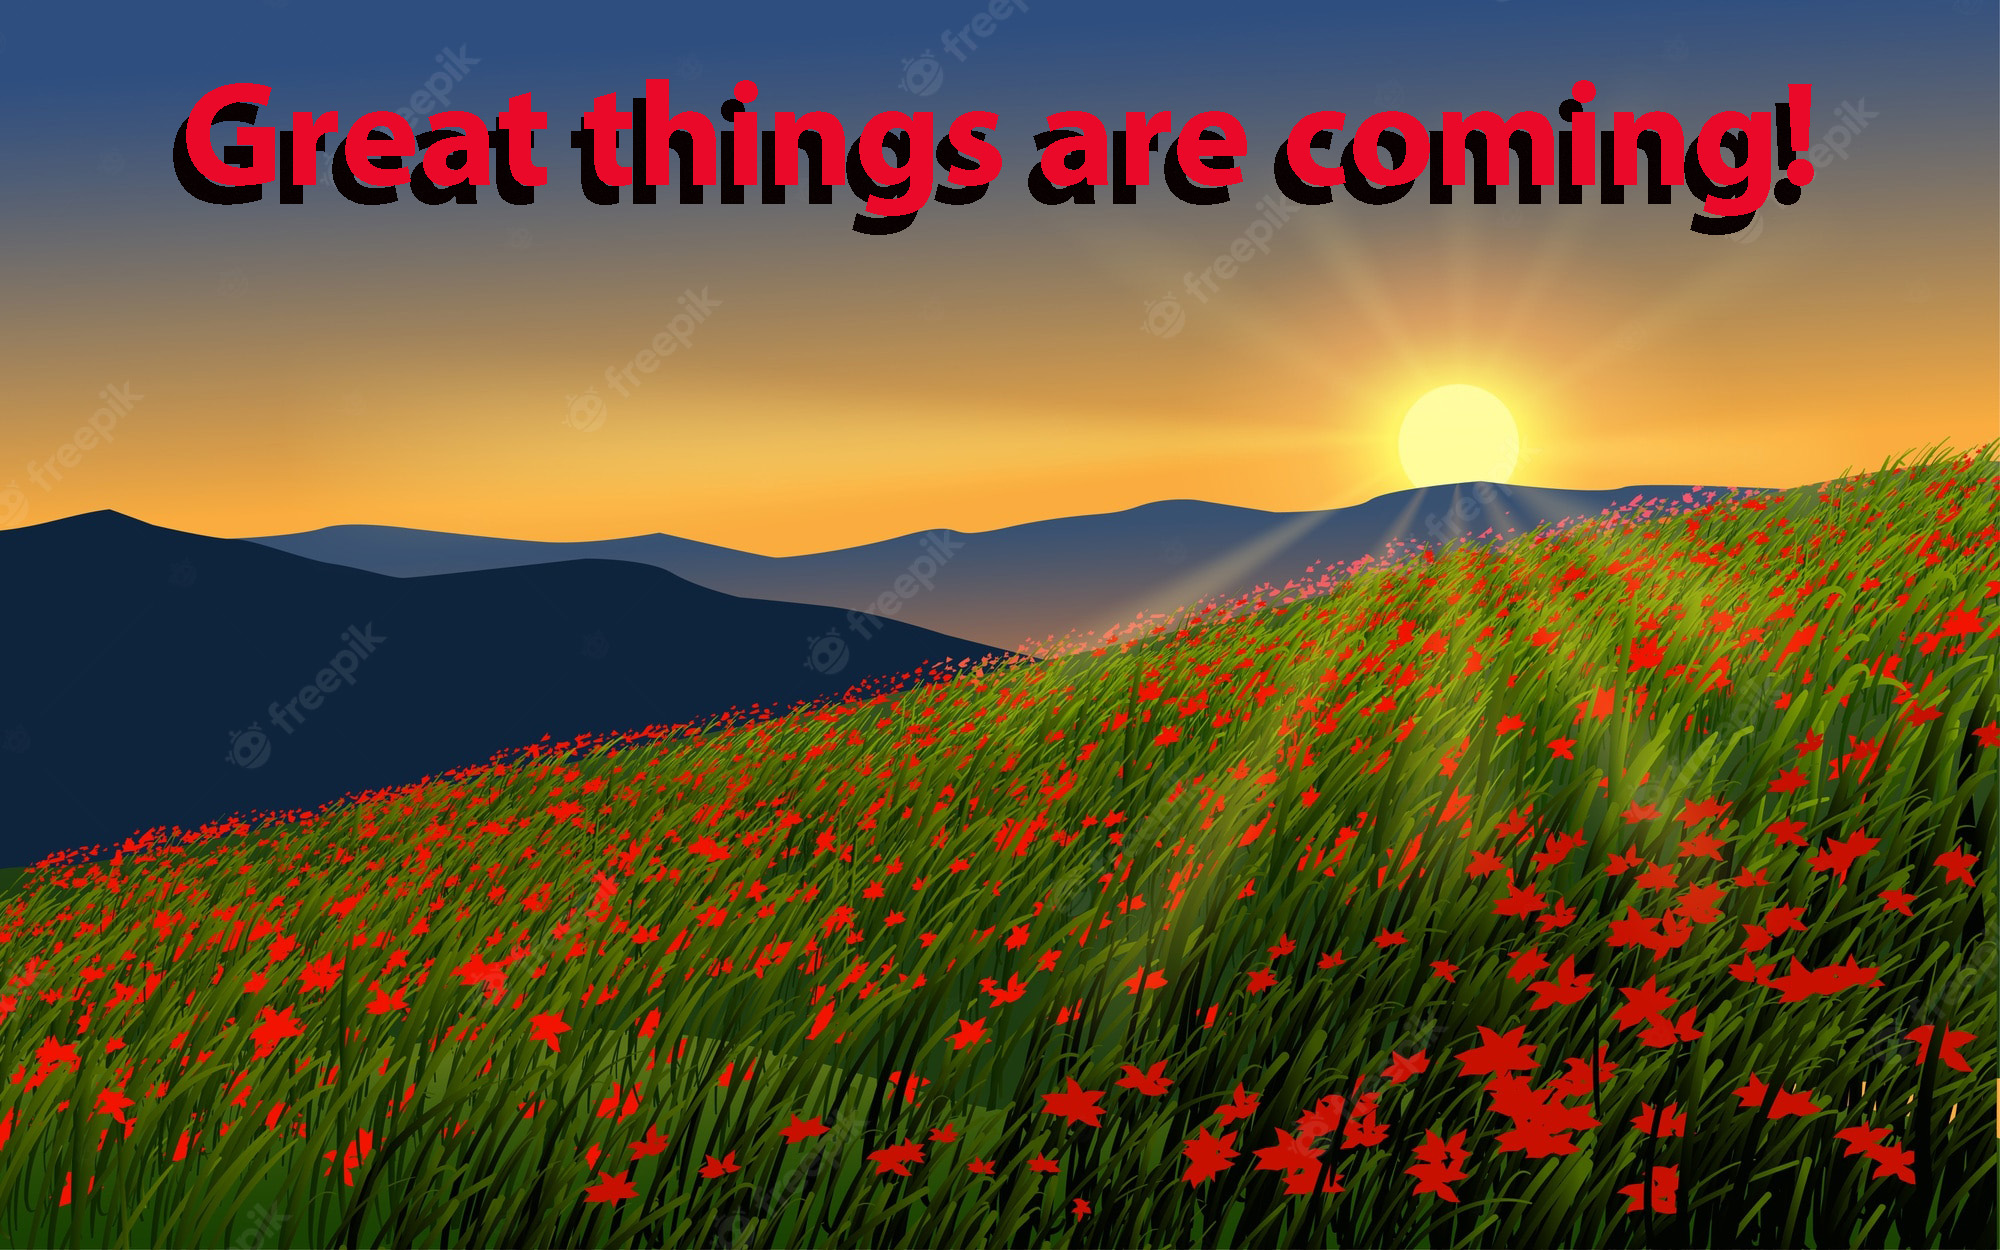 Great things are coming….trust the preparation